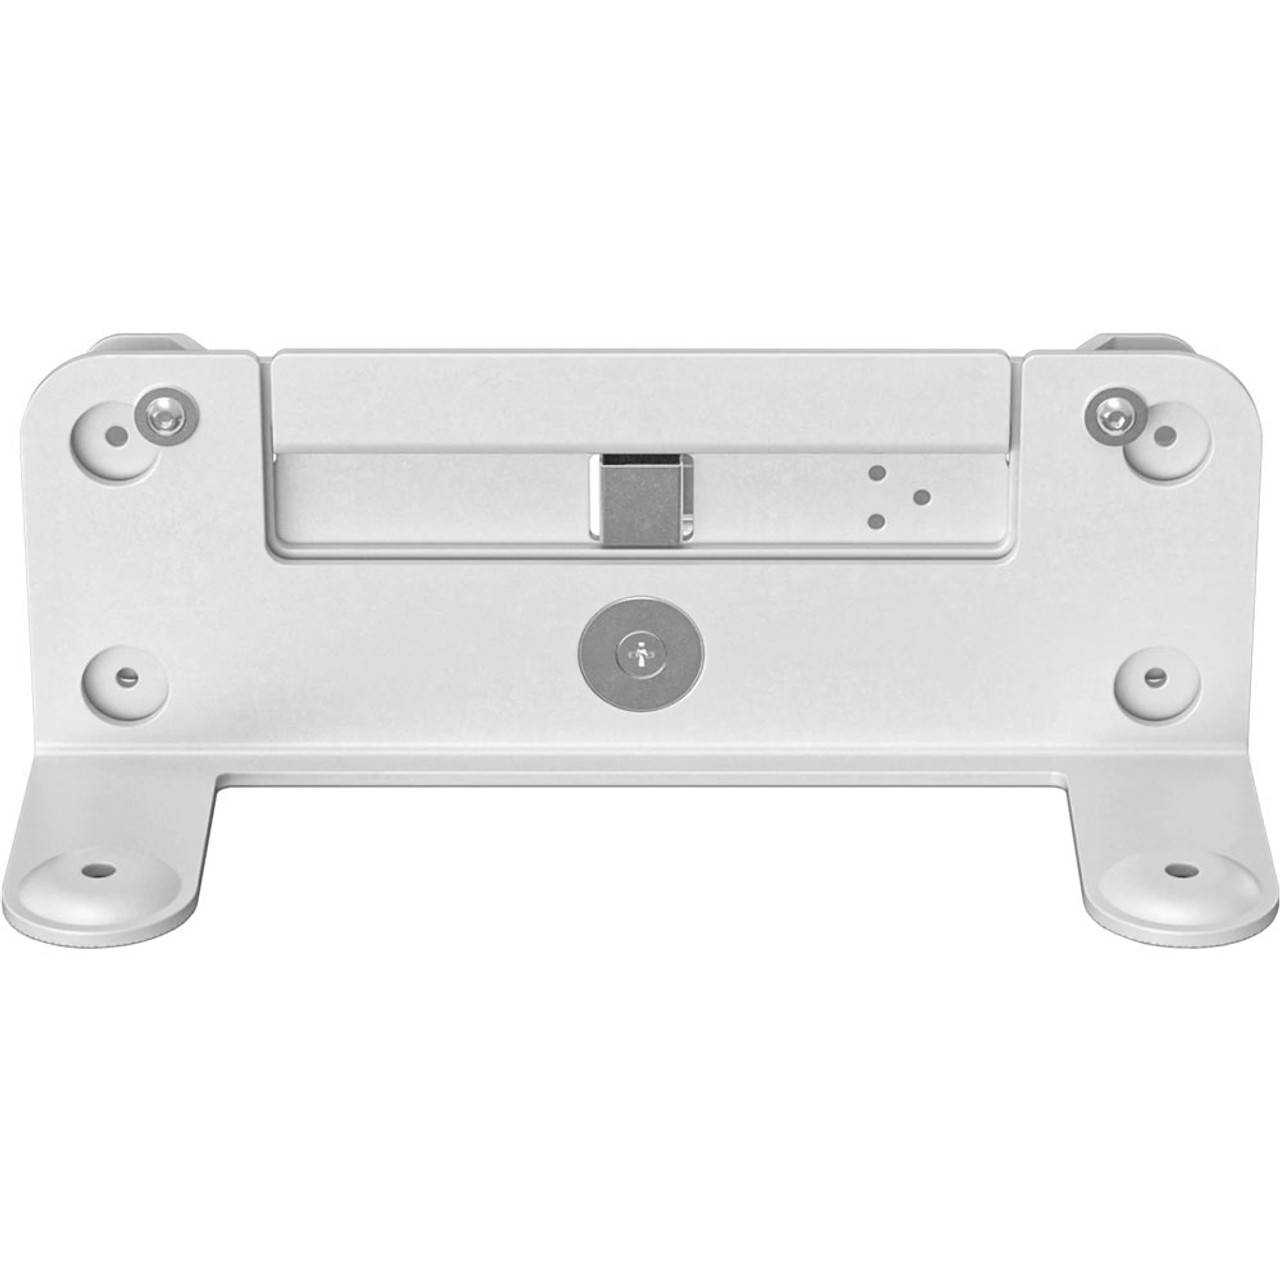 Logitech Rally Wall Mount for Video Bars - 952-000044